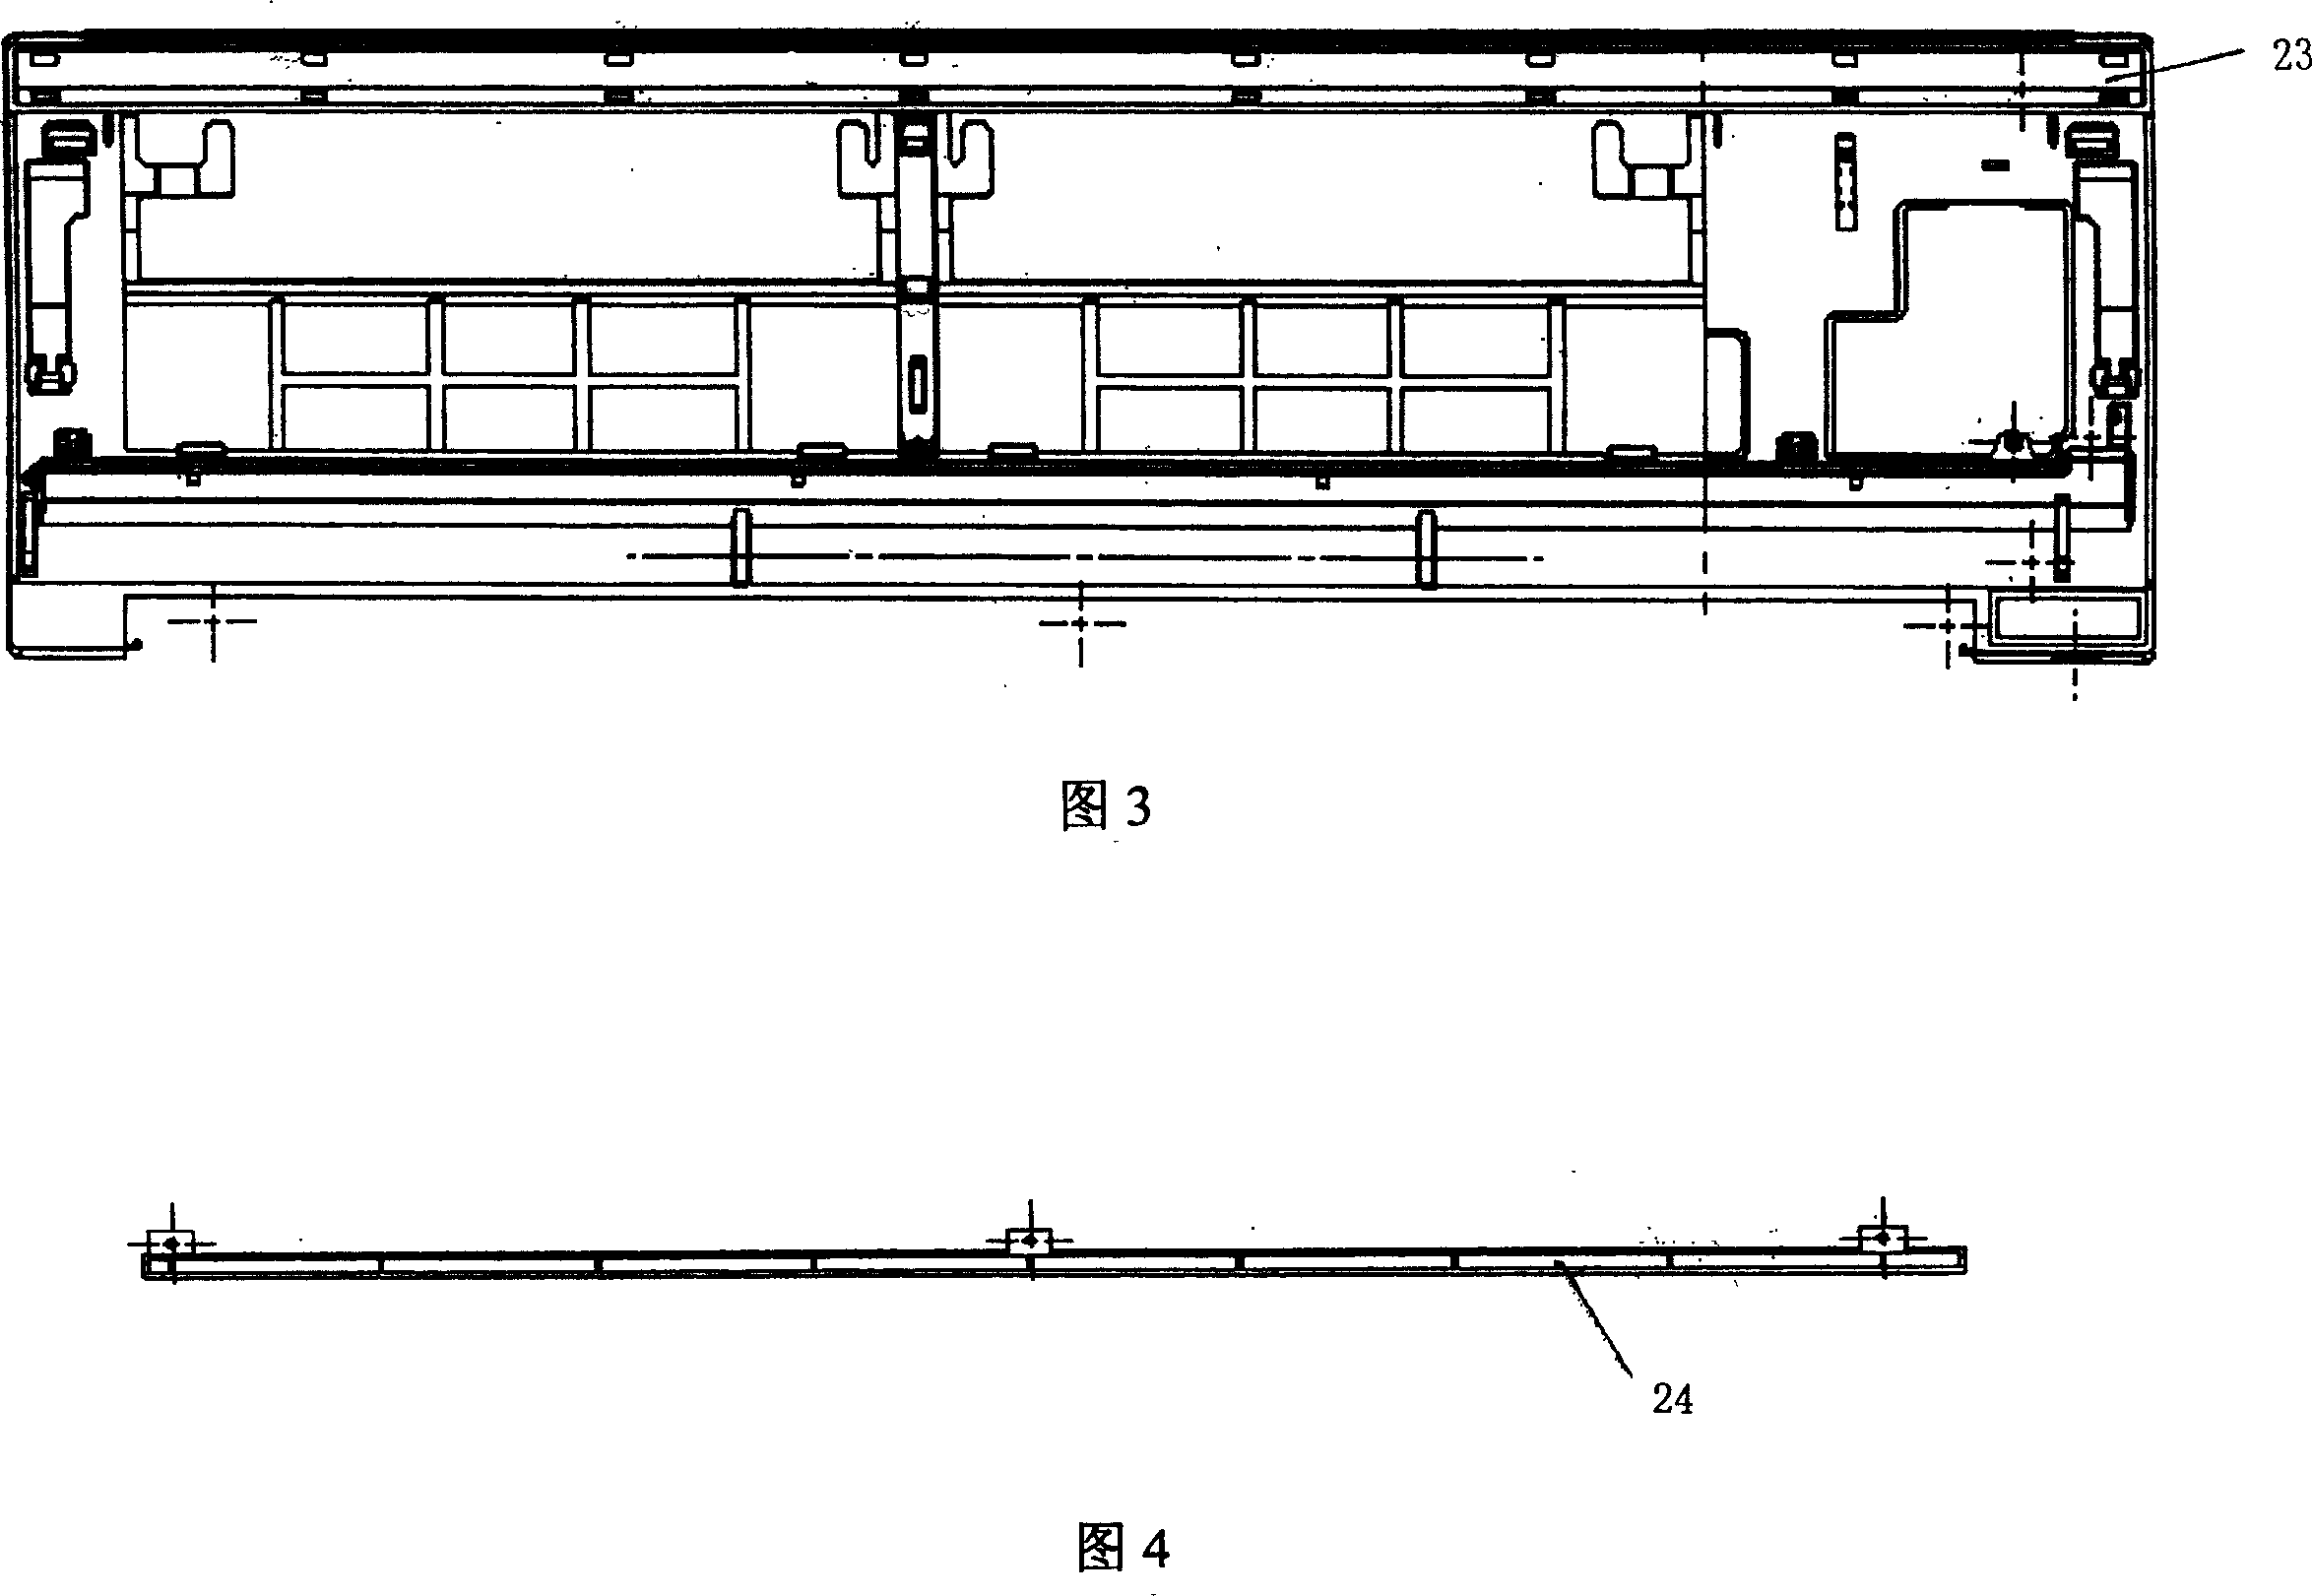 Front-panel structure of indoor unit of air conditioner